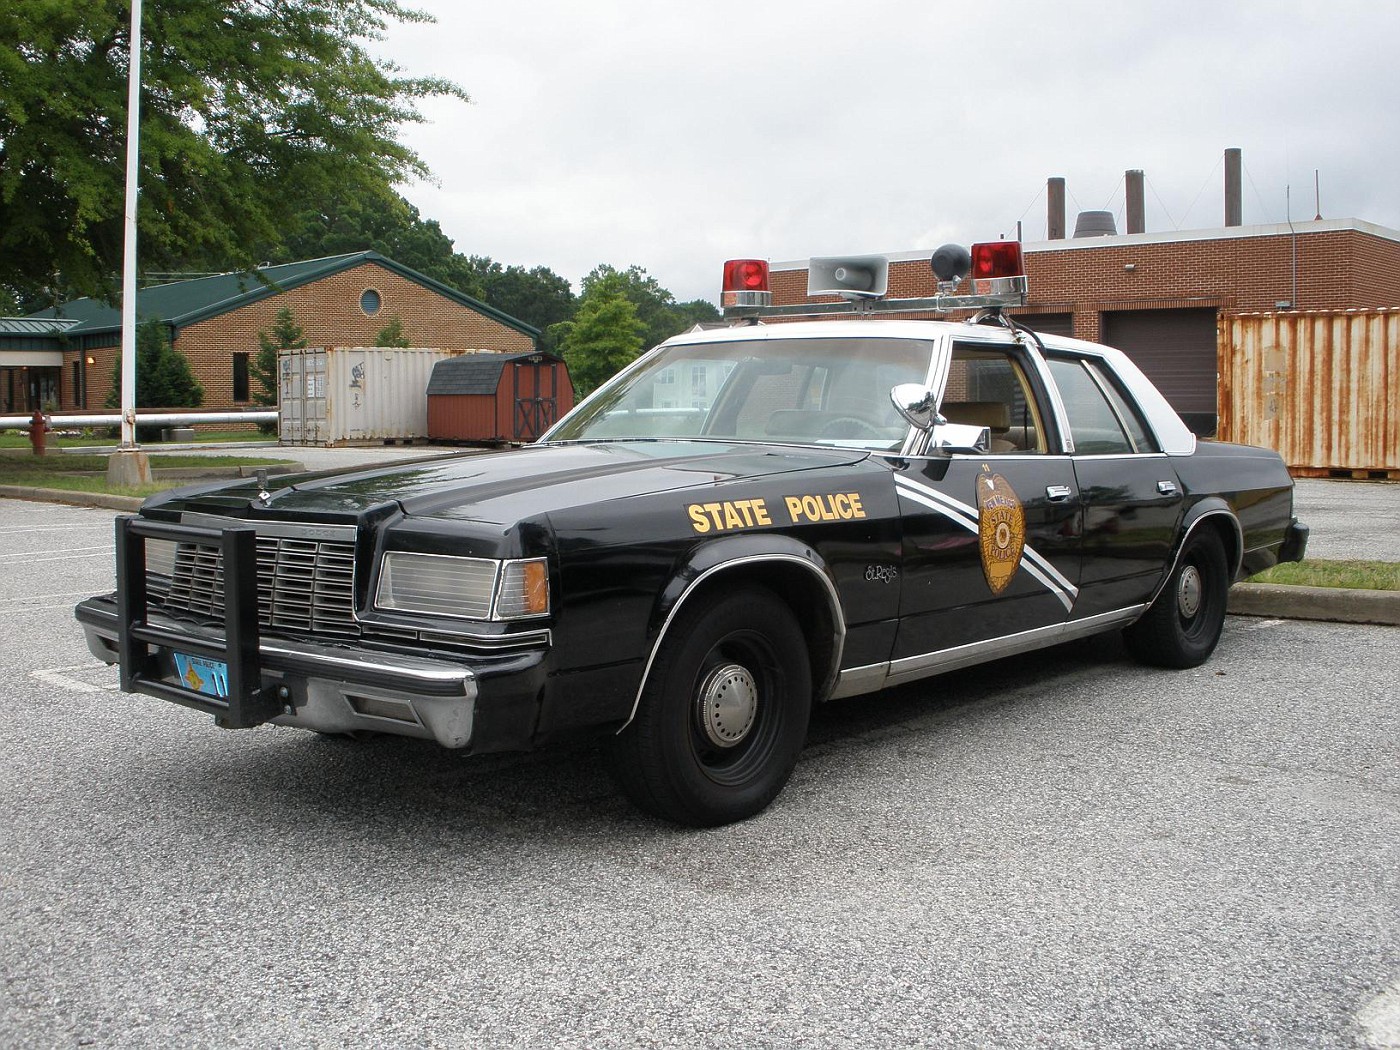 copcar dot com - The home of the American Police Car - Photo Archives